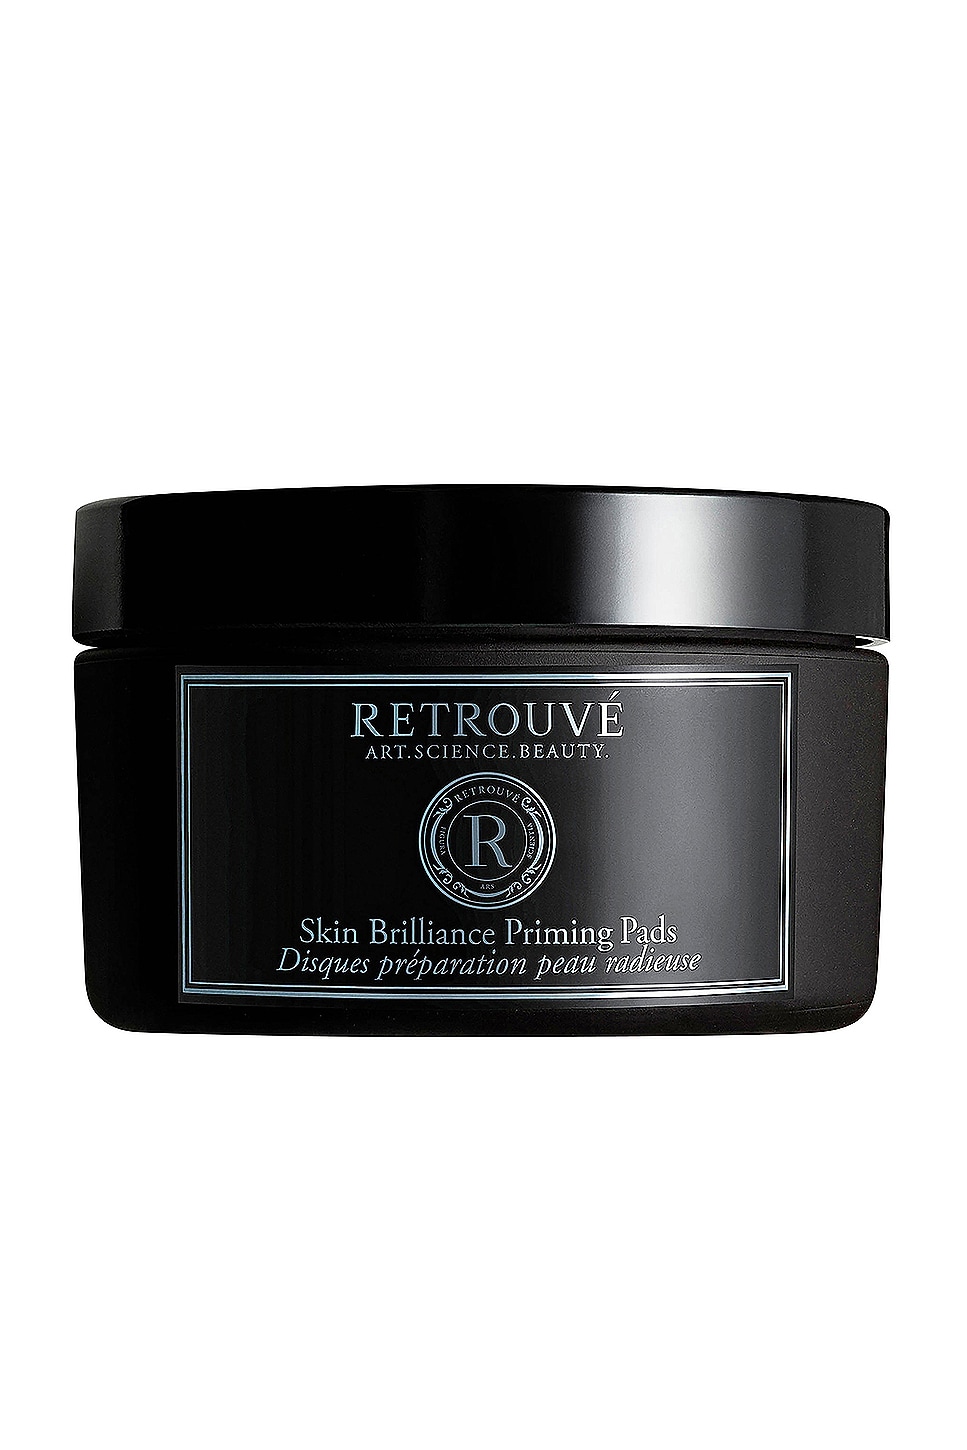 RETROUVÉ Skin Brilliance Priming Pads in Beauty: NA